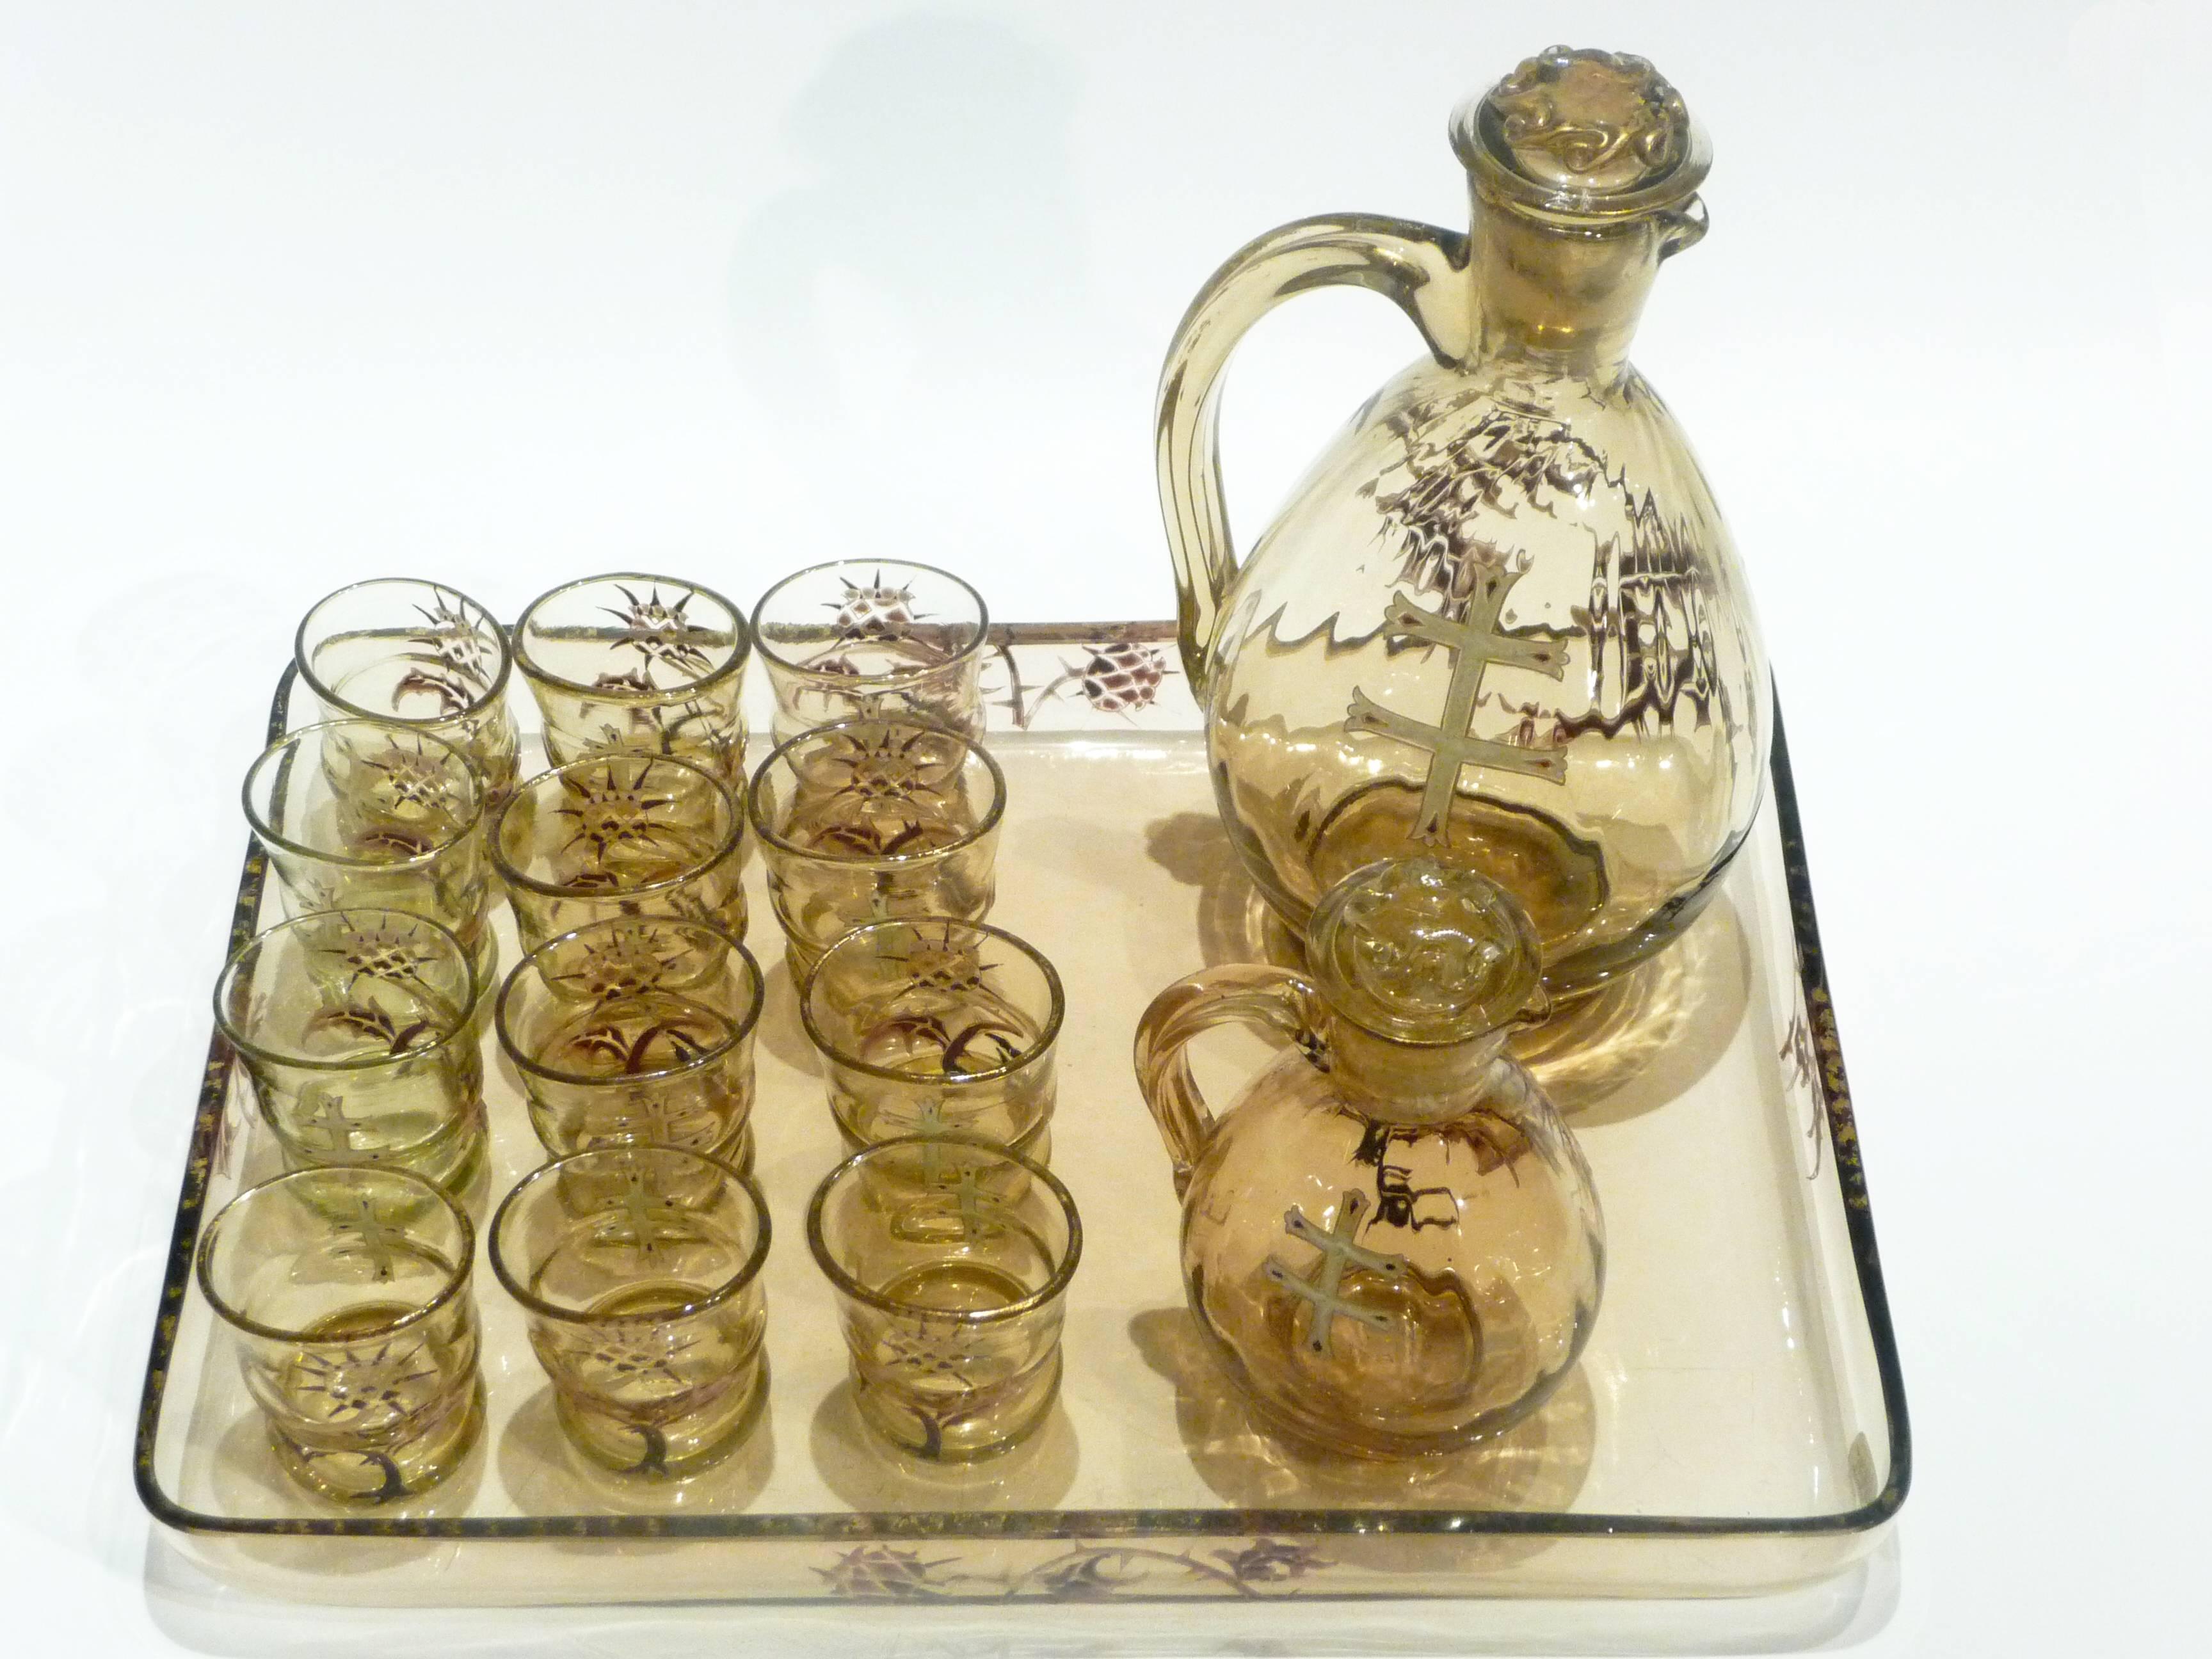 Emile Gallé
An Art Nouveau liqueur service
Including two jugs and their stoppers, 12 small glasses and a tray.
Enameled smoked glass decorated with thistles and the Cross of Lorraine
Signed

Measure: Jug 20 cm high; 13 cm width
Jug 12.5 cm